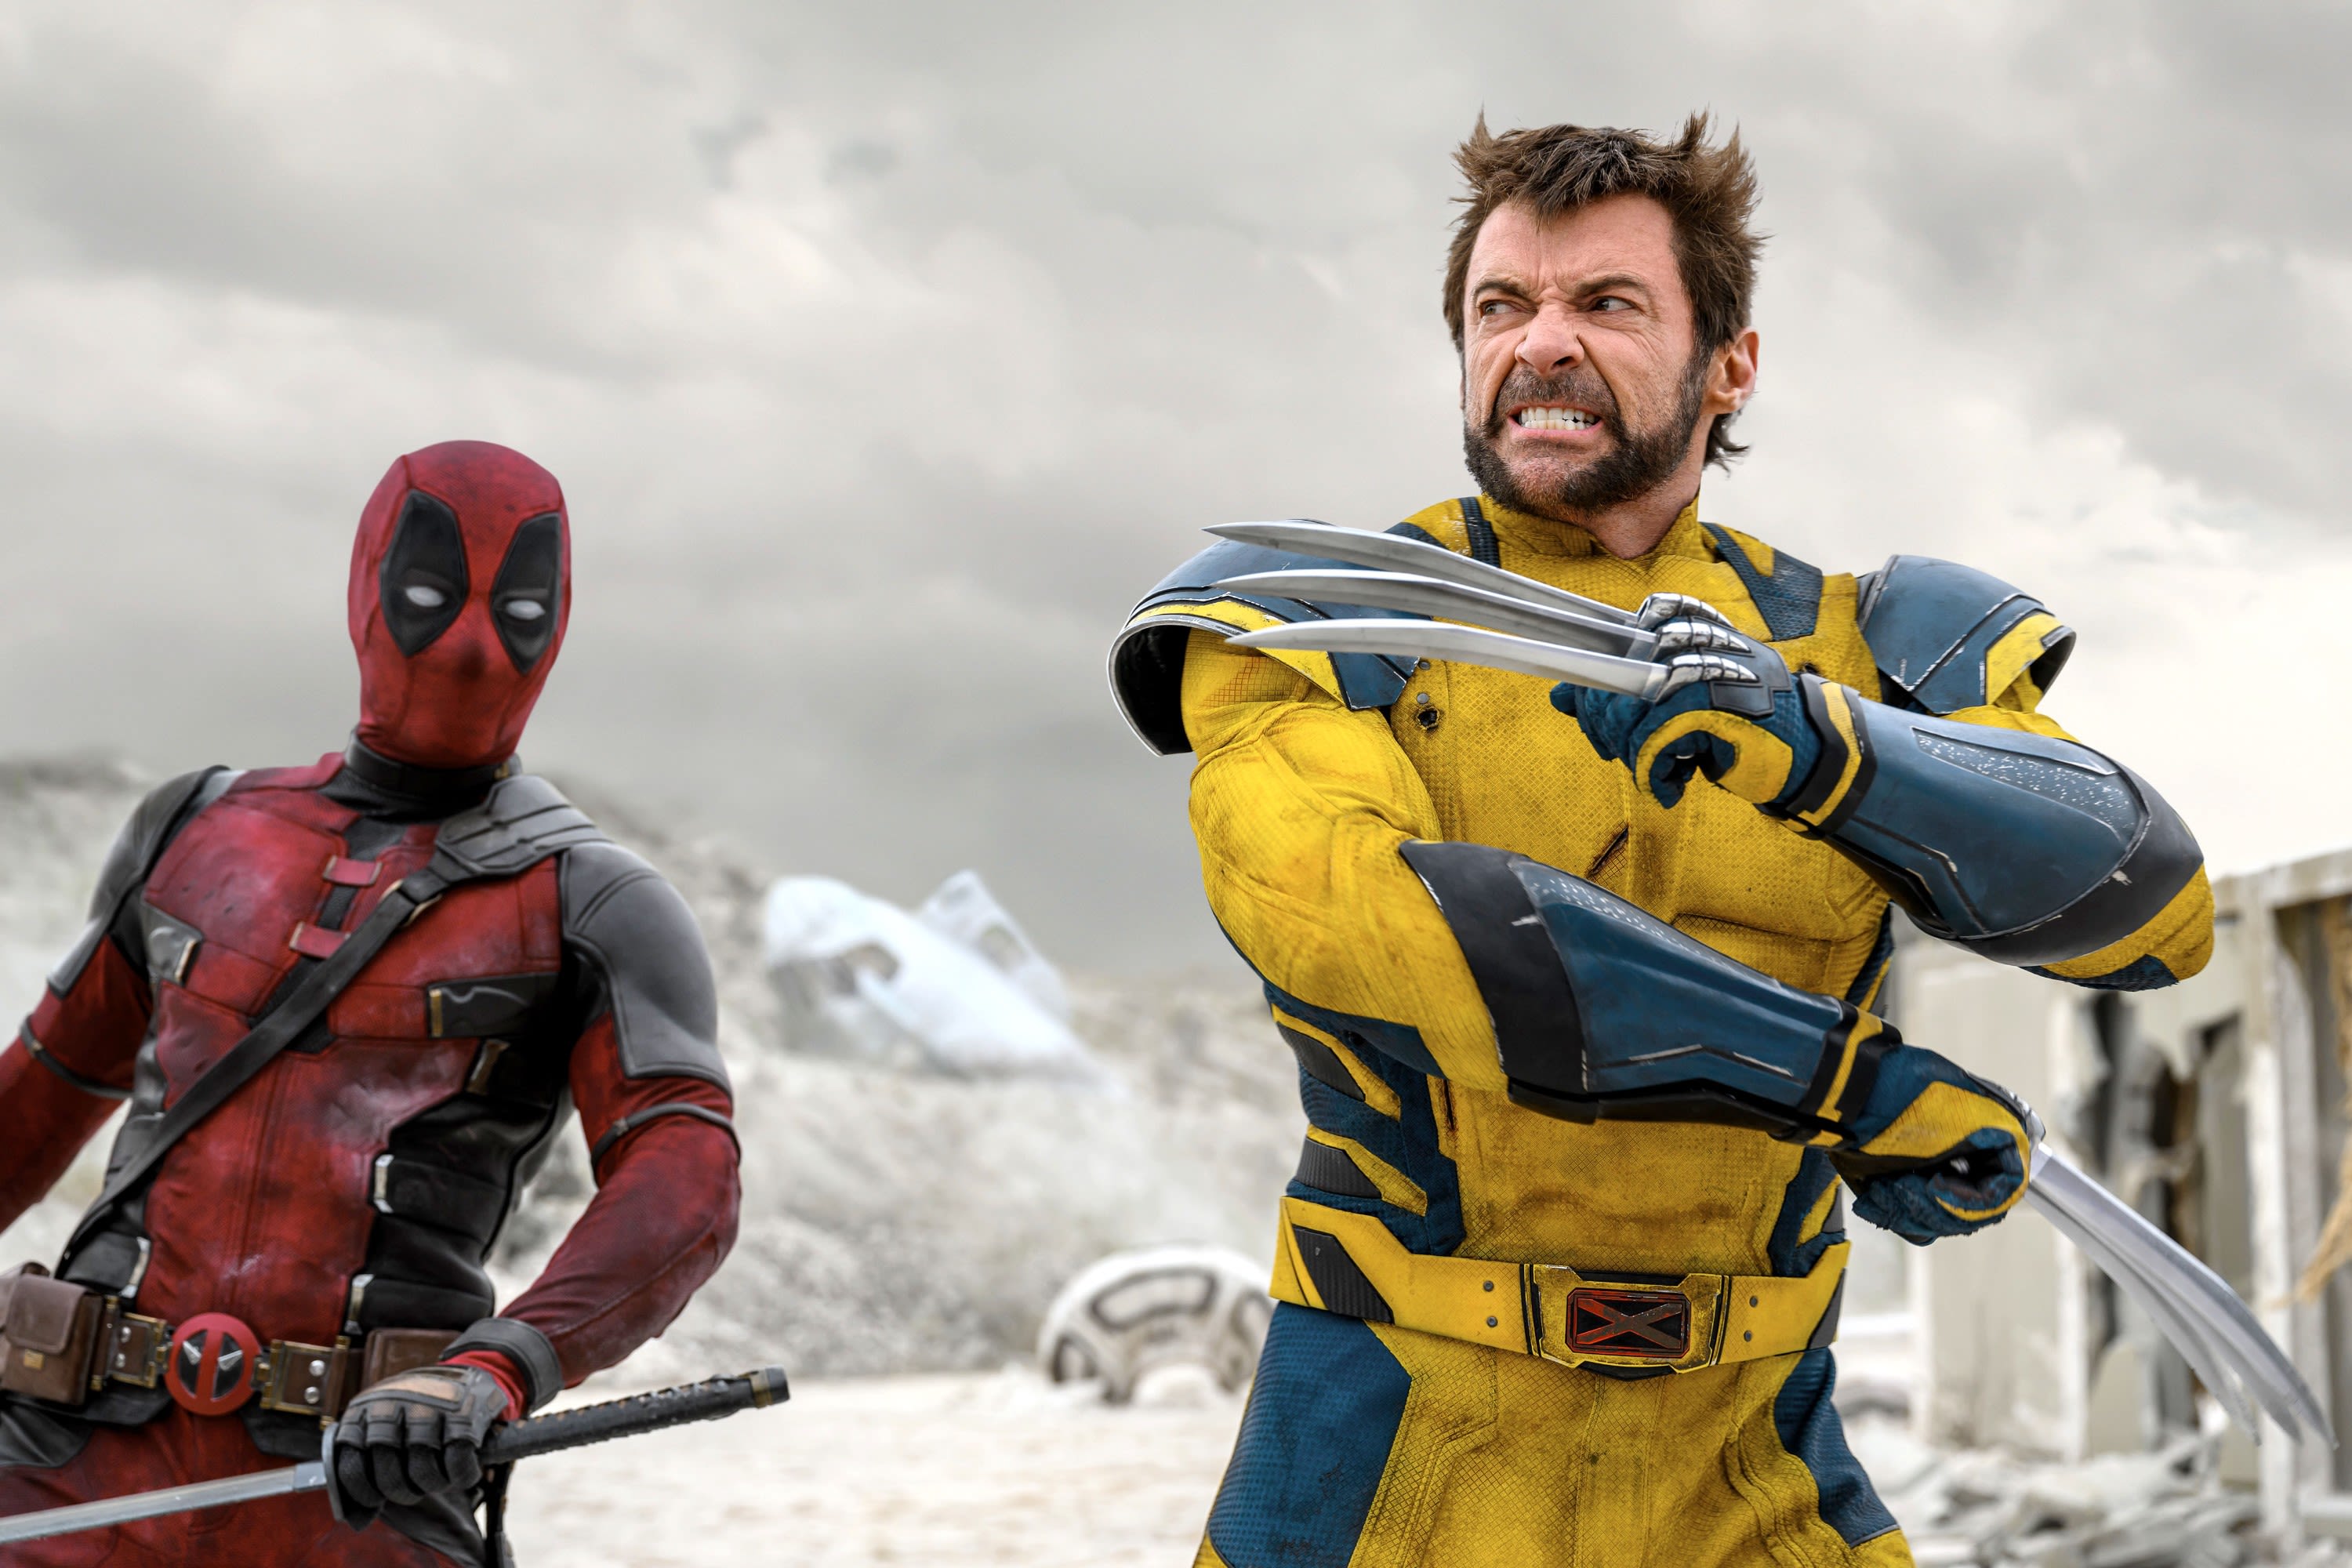 ...Wolverine’ Goes Wild On Friday With $95M+, 6th-Best Opening Day At Domestic B.O., ‘A’ CinemaScore, Weekend Now At $195M-$205M – Saturday AM...